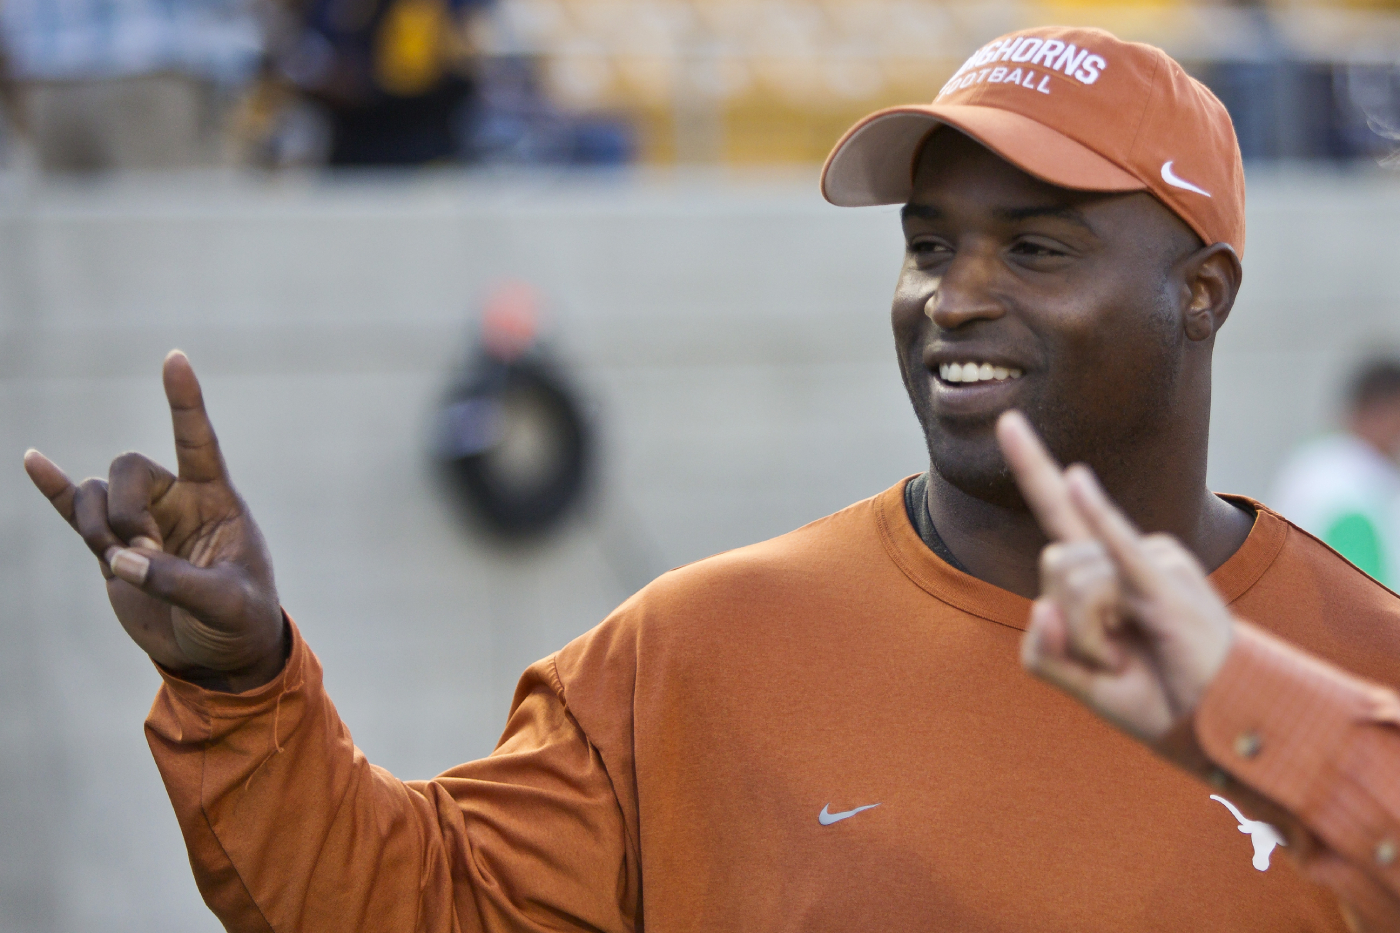 Texas Longhorns legend and 1998 Heisman winner Ricky Williams hasn't played in the pros since the 2011 season. He could be back soon, though.